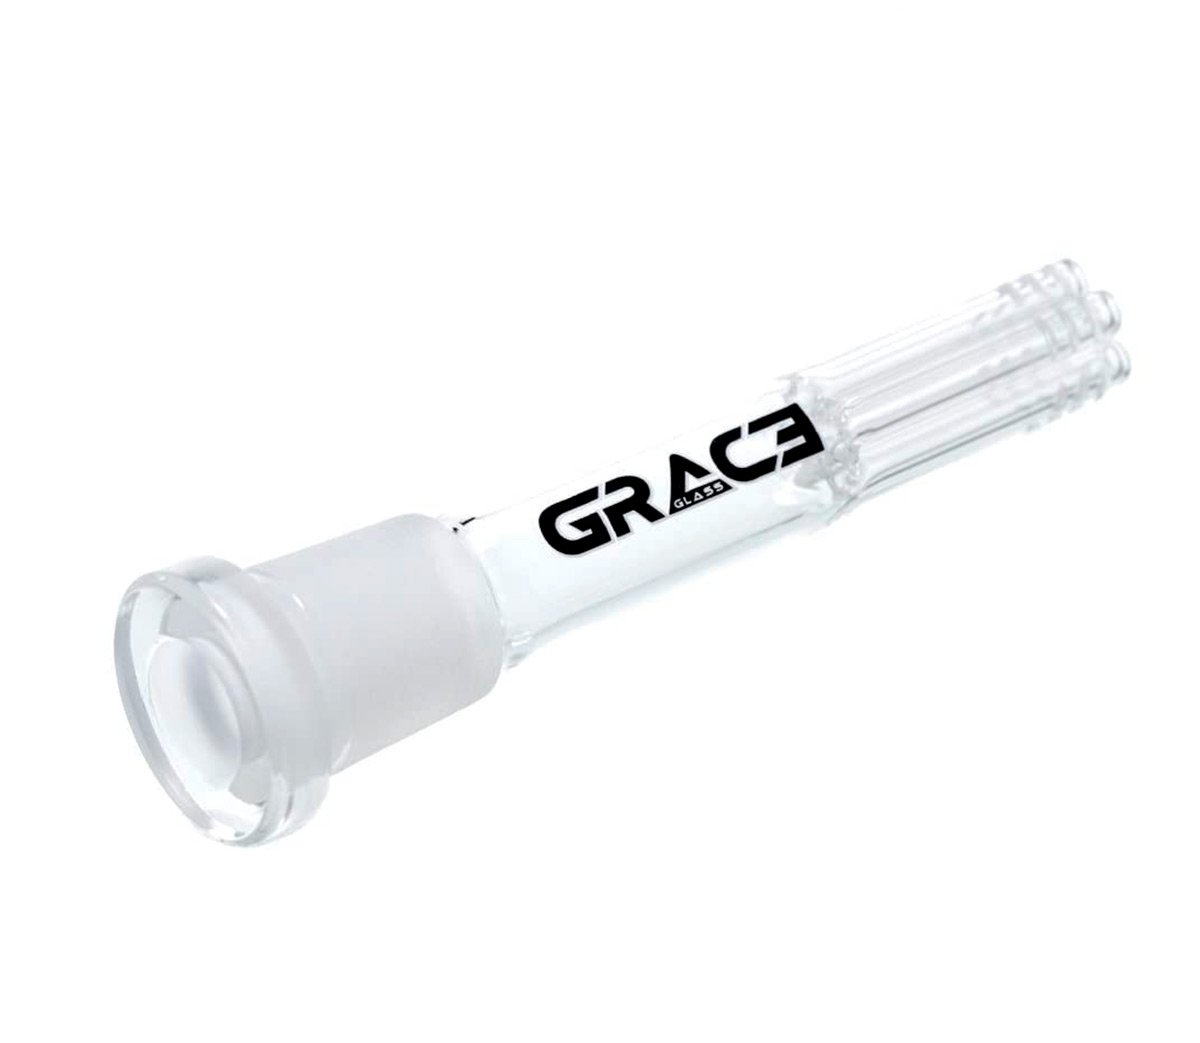 Grace Glass 6 Arm Diffuser downpipe - 13 cm - SG 29.2 to 18.8mm - Waterpijp-bong.nl